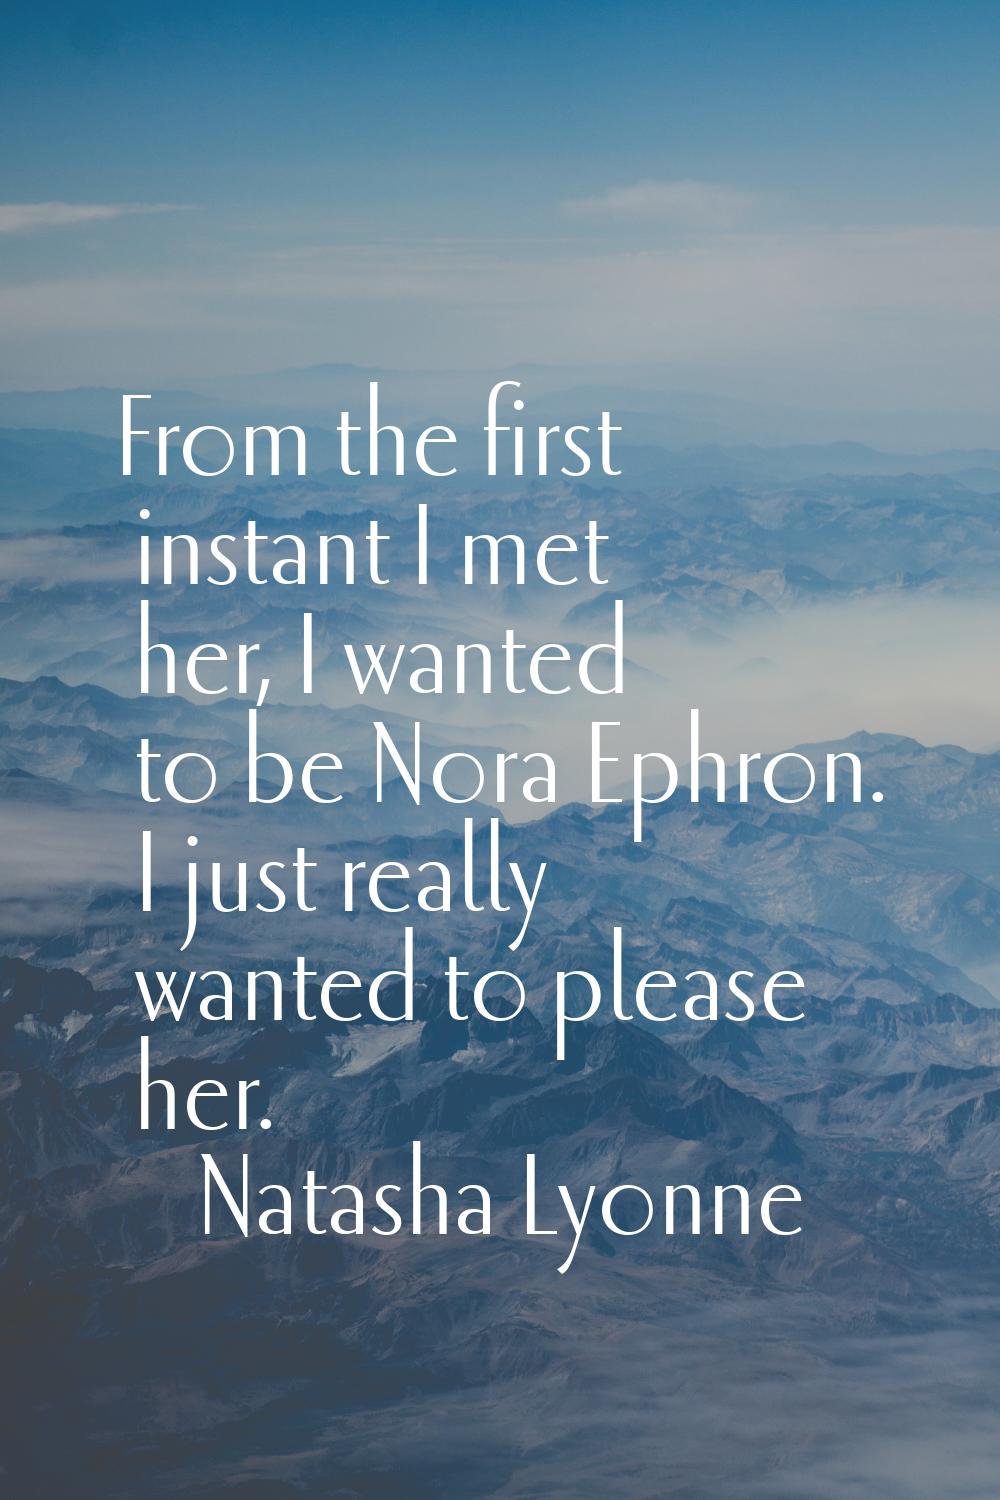 From the first instant I met her, I wanted to be Nora Ephron. I just really wanted to please her.